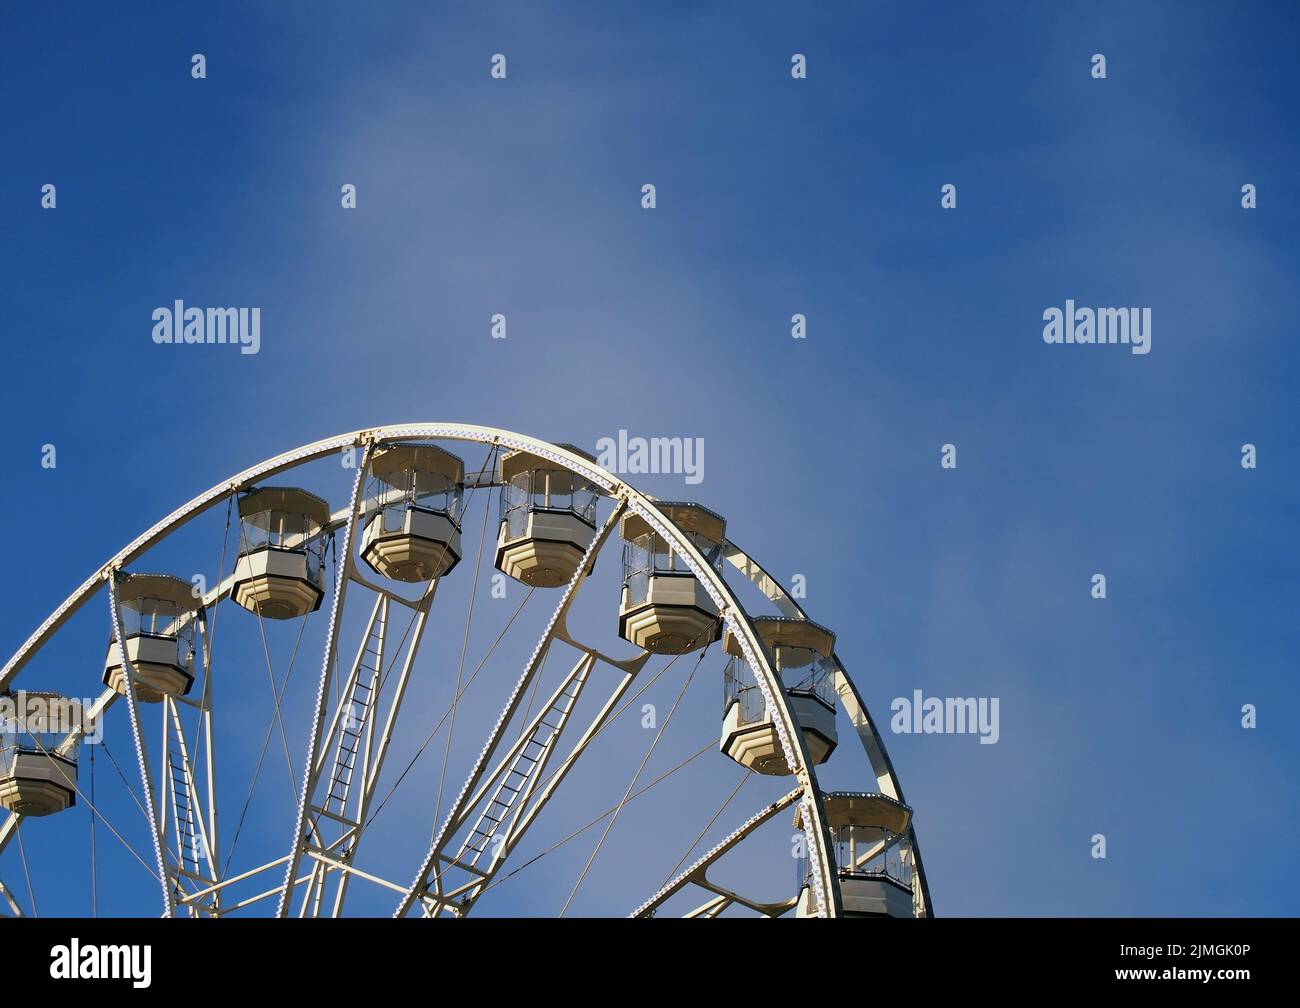 Close up of a white ferris wheel with enclosed gondola cars against a bright blue sky Stock Photo